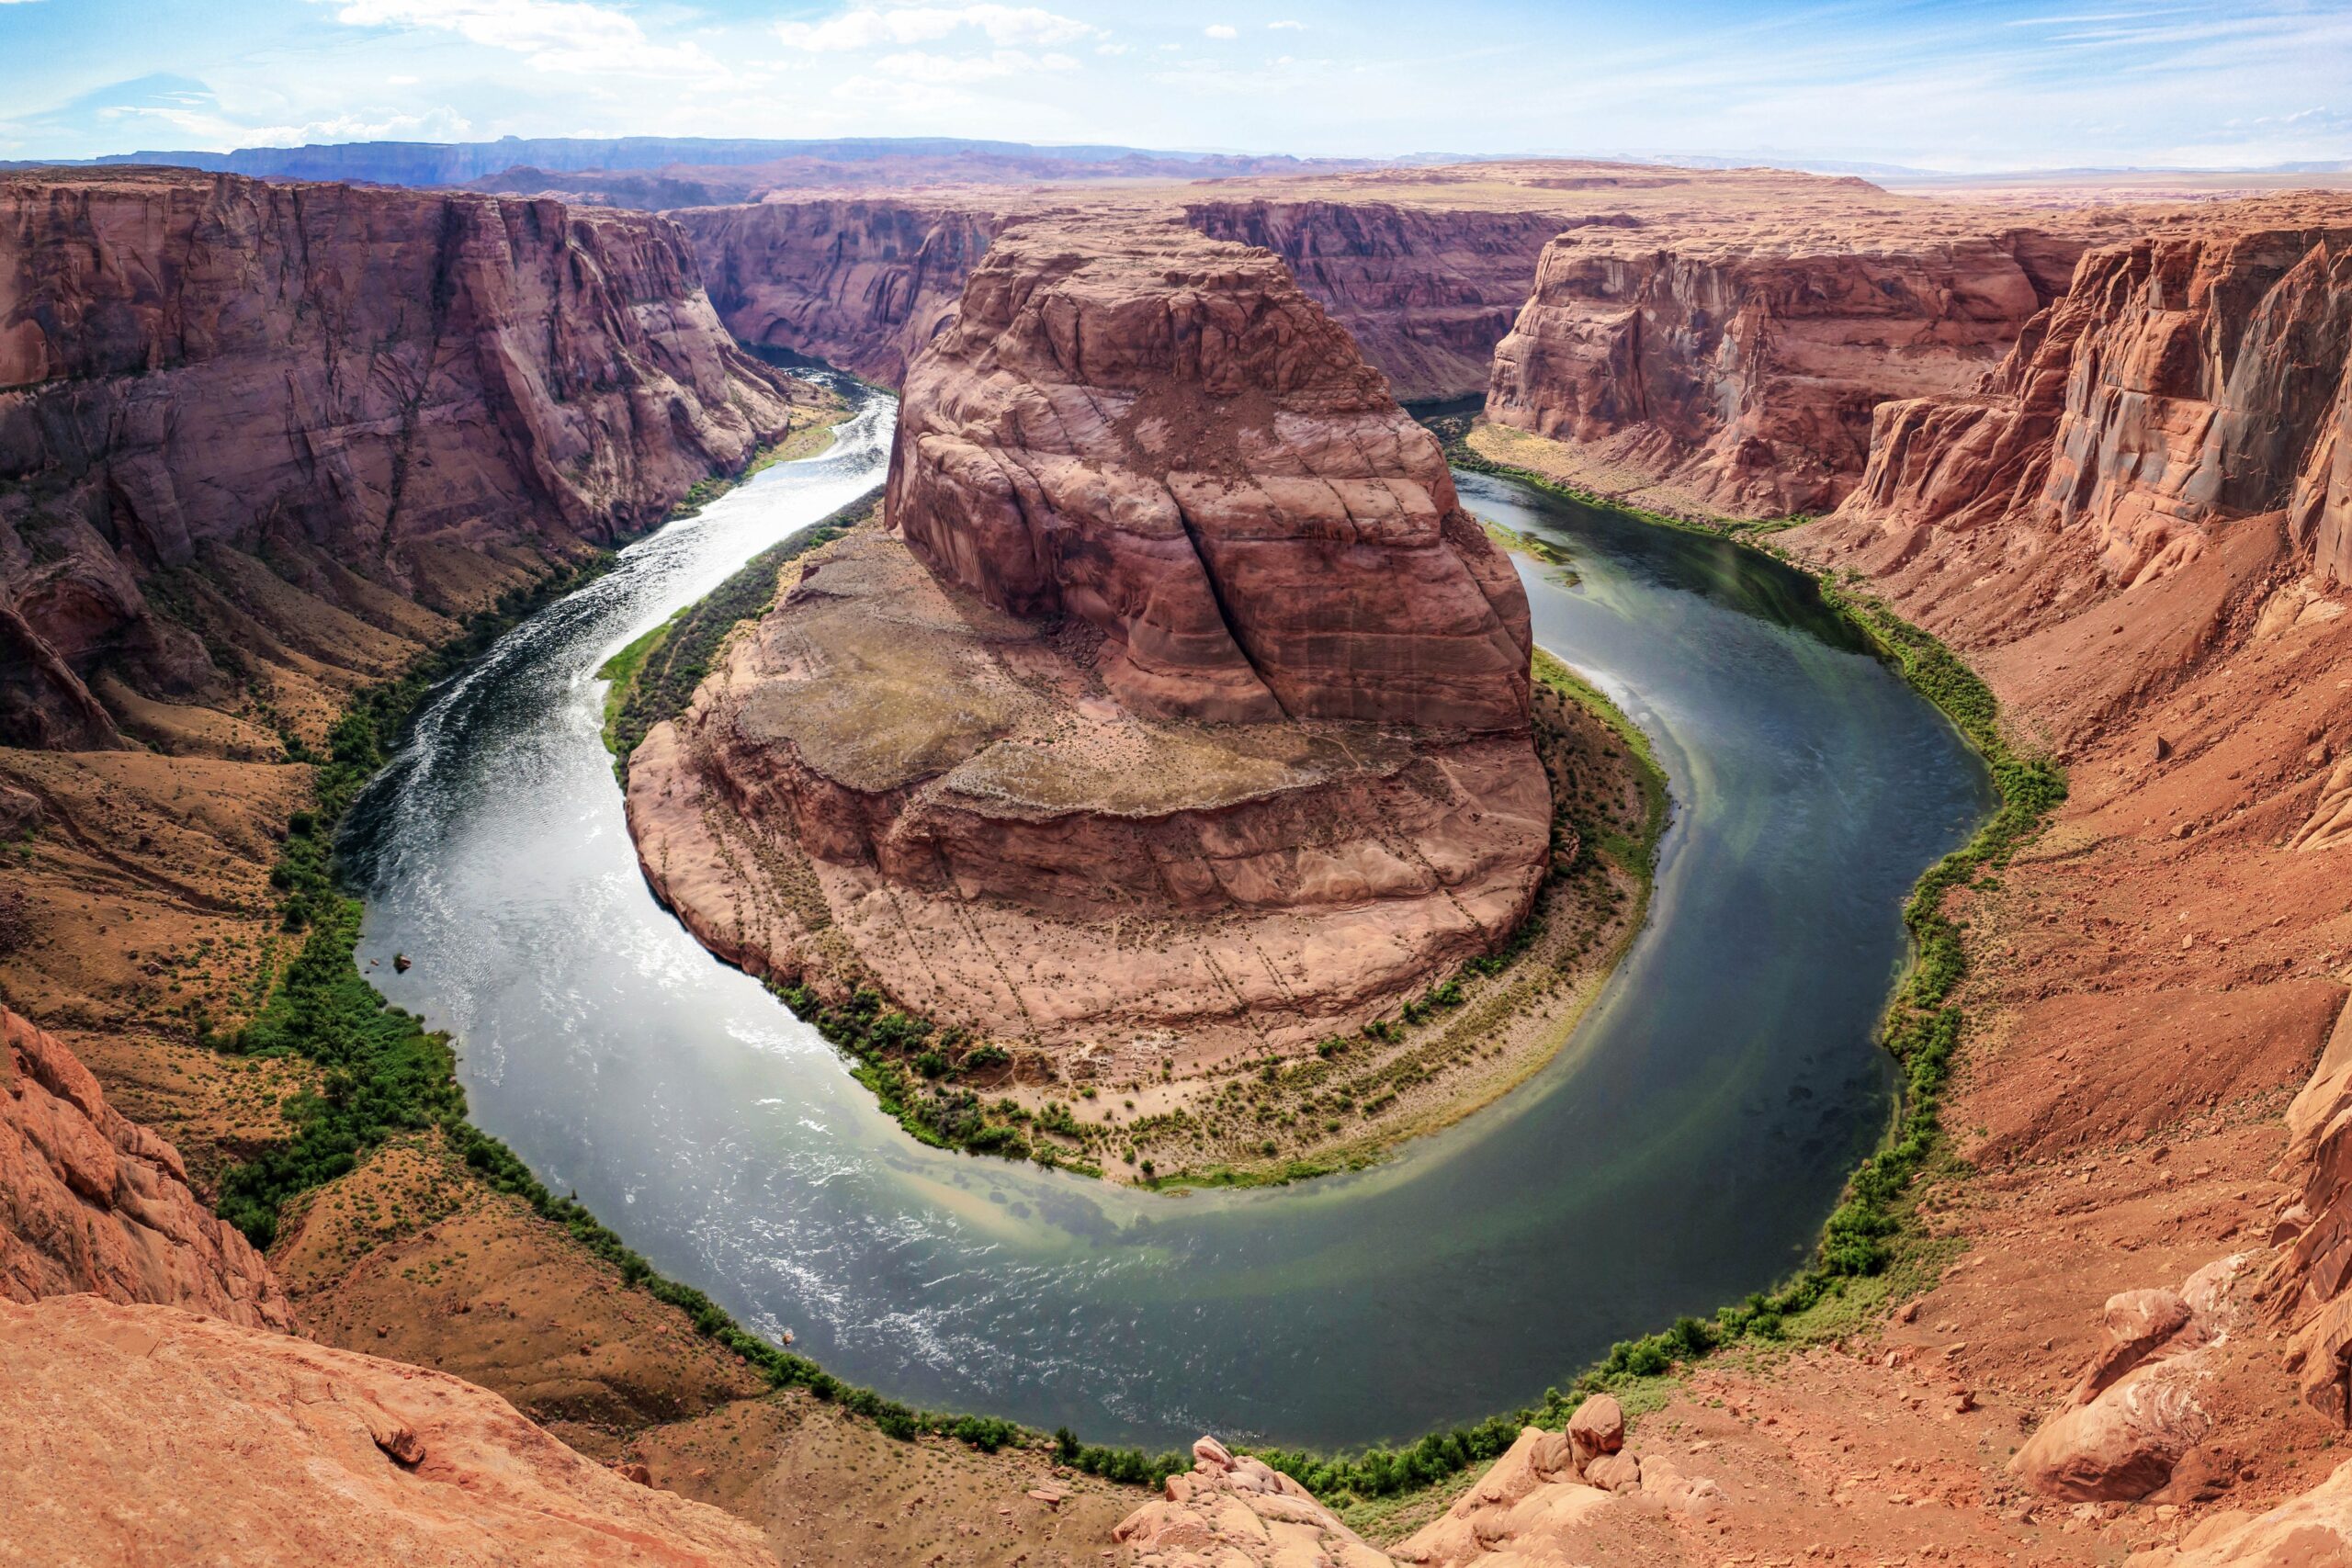 From pollution to dams: here’s what is plaguing America’s 10 most endangered rivers